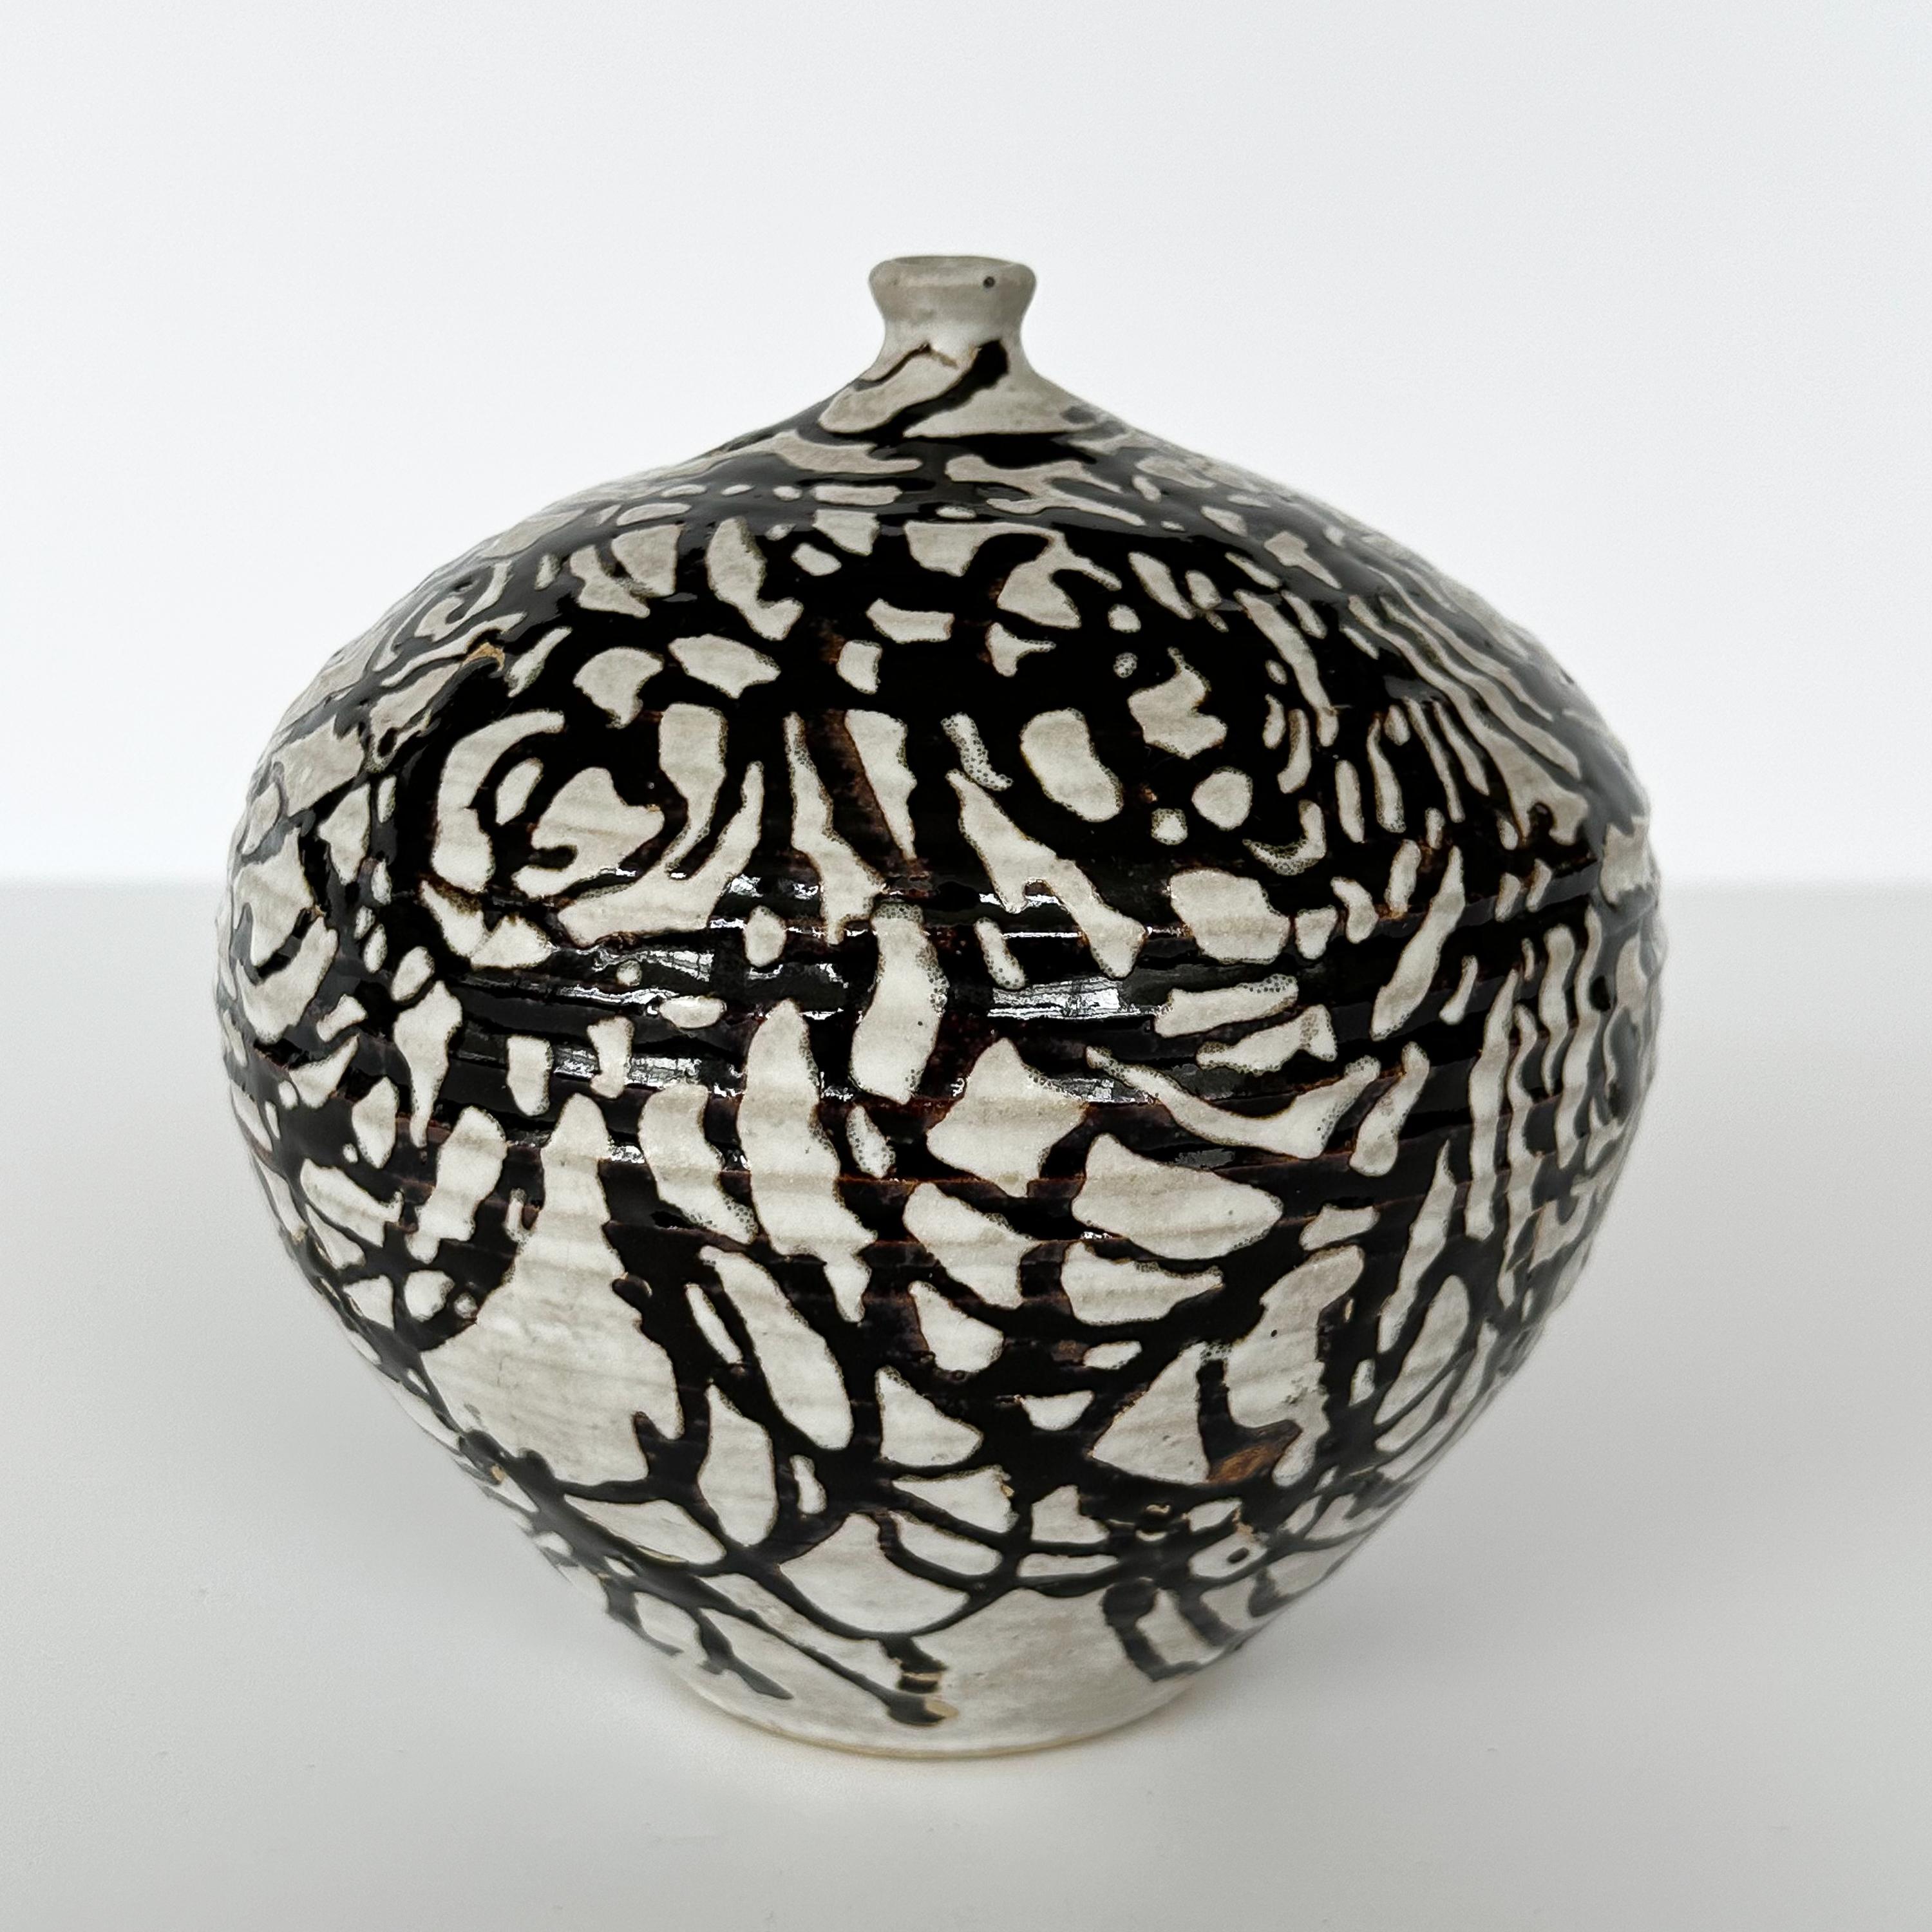 A rare / early JT Abernathy (American b. 1923) studio pottery weed vase, circa 1960s. This vase features a matte white background overlaid with a dark chocolate brown glaze in a graphic loose swirling abstract design. The glaze created almost an